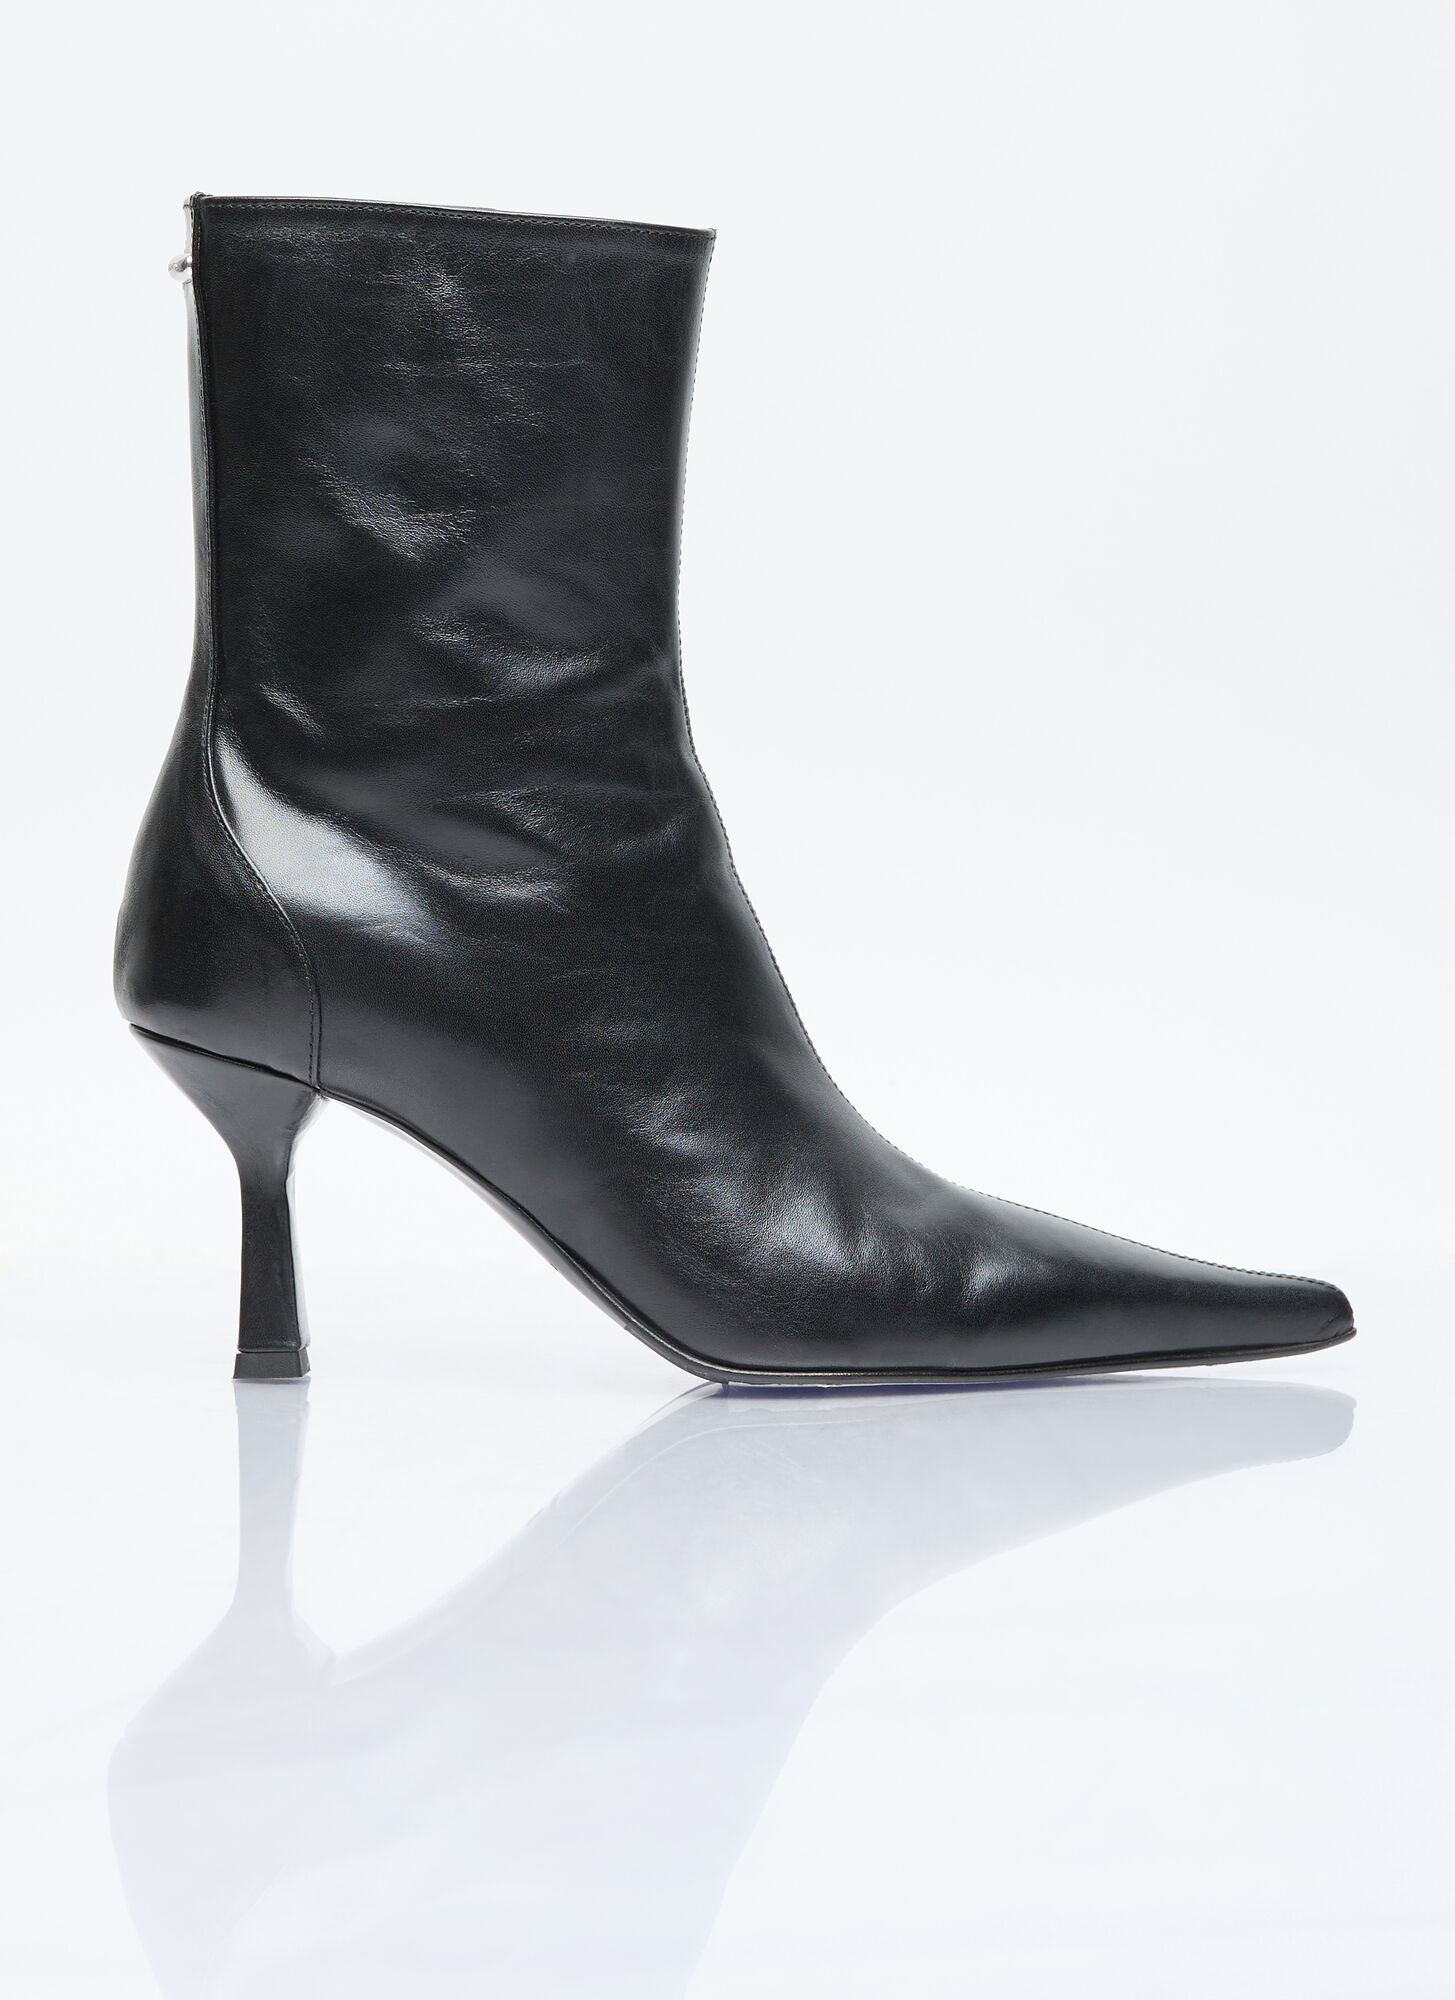 Shop Our Legacy Slim Leather Boots In Black